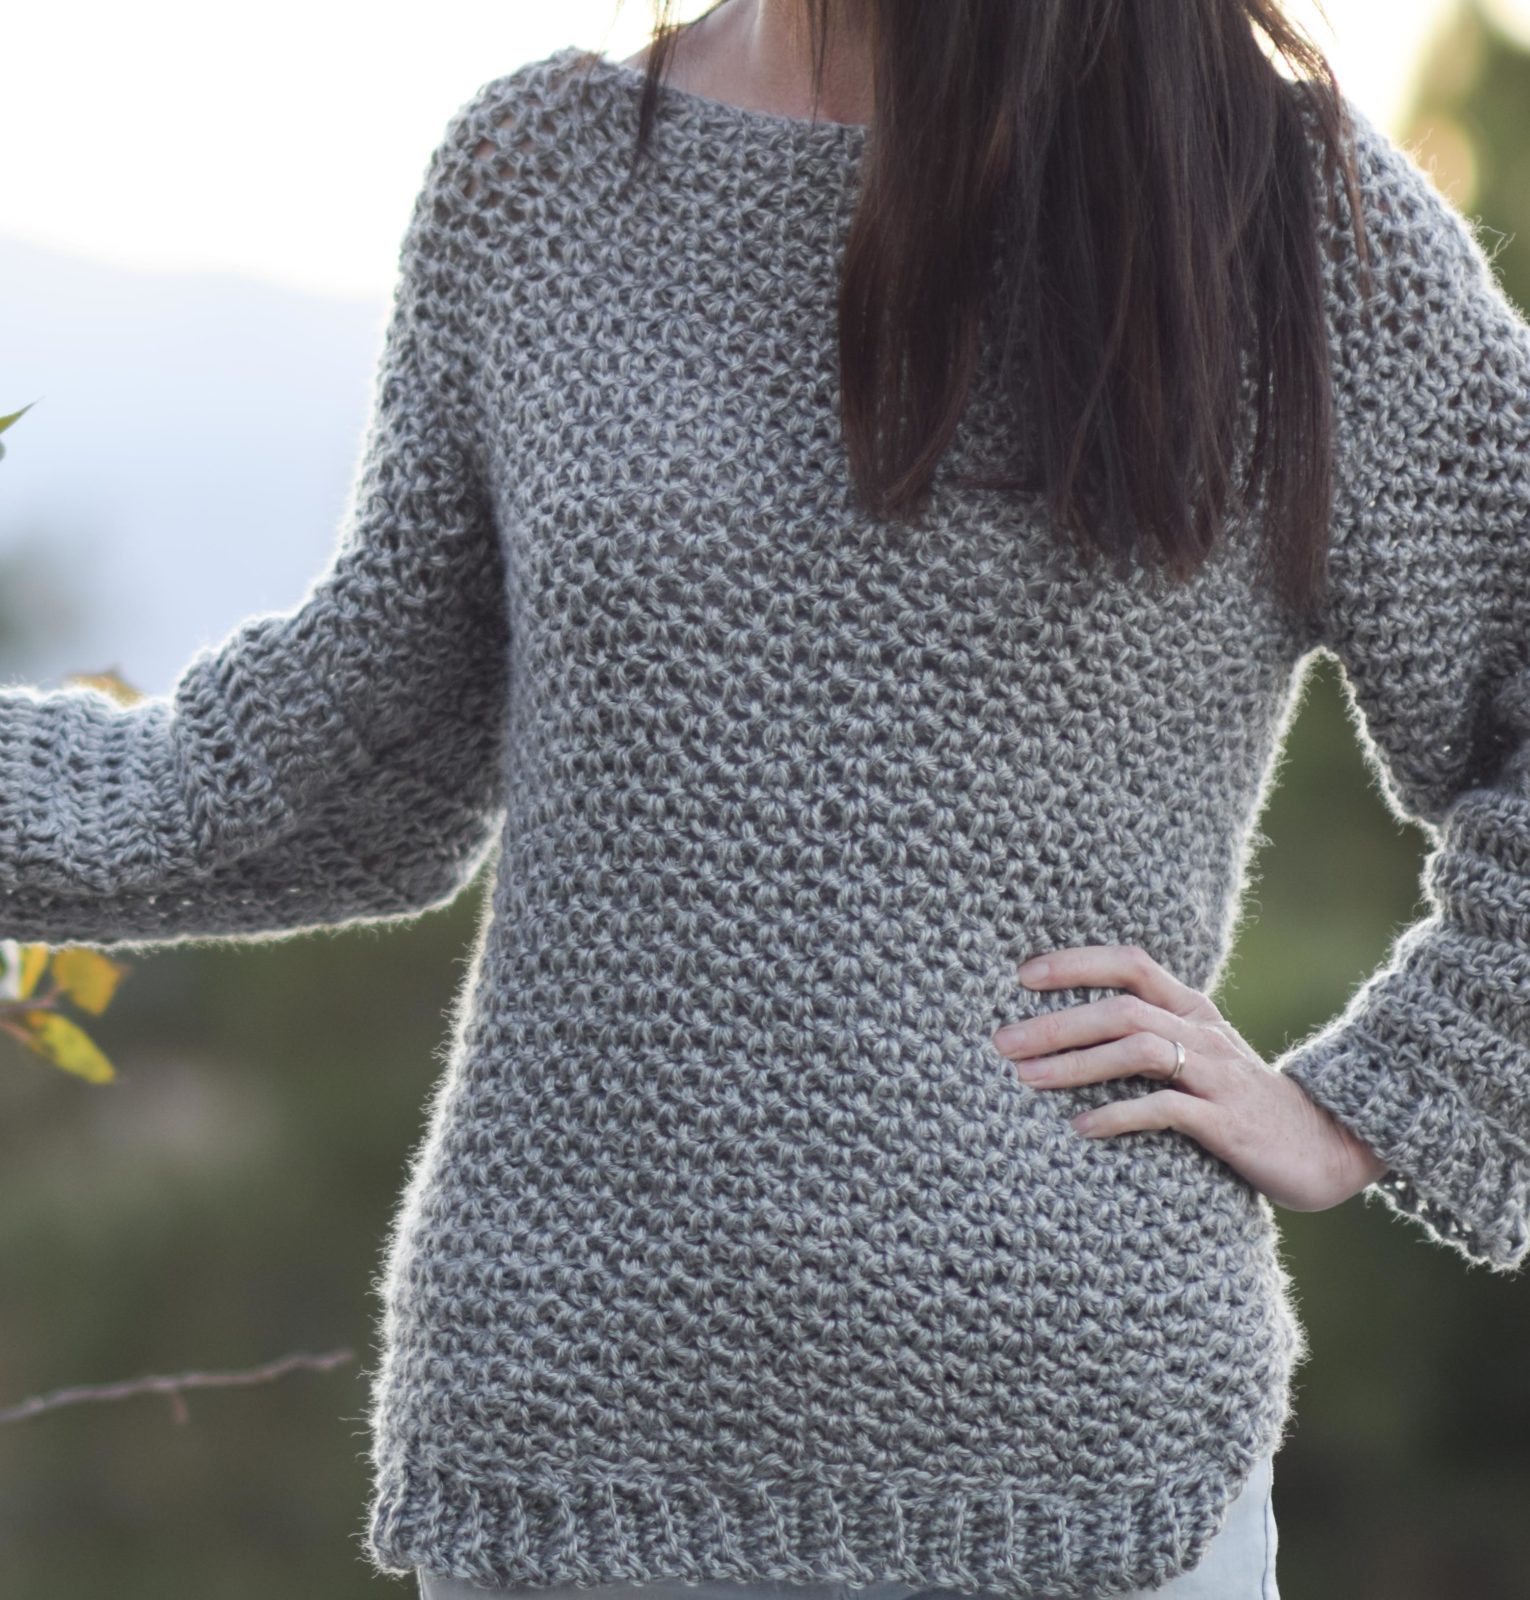 crochet sweater patterns this is a terrific yarn at a great value - i only used xbovtkv